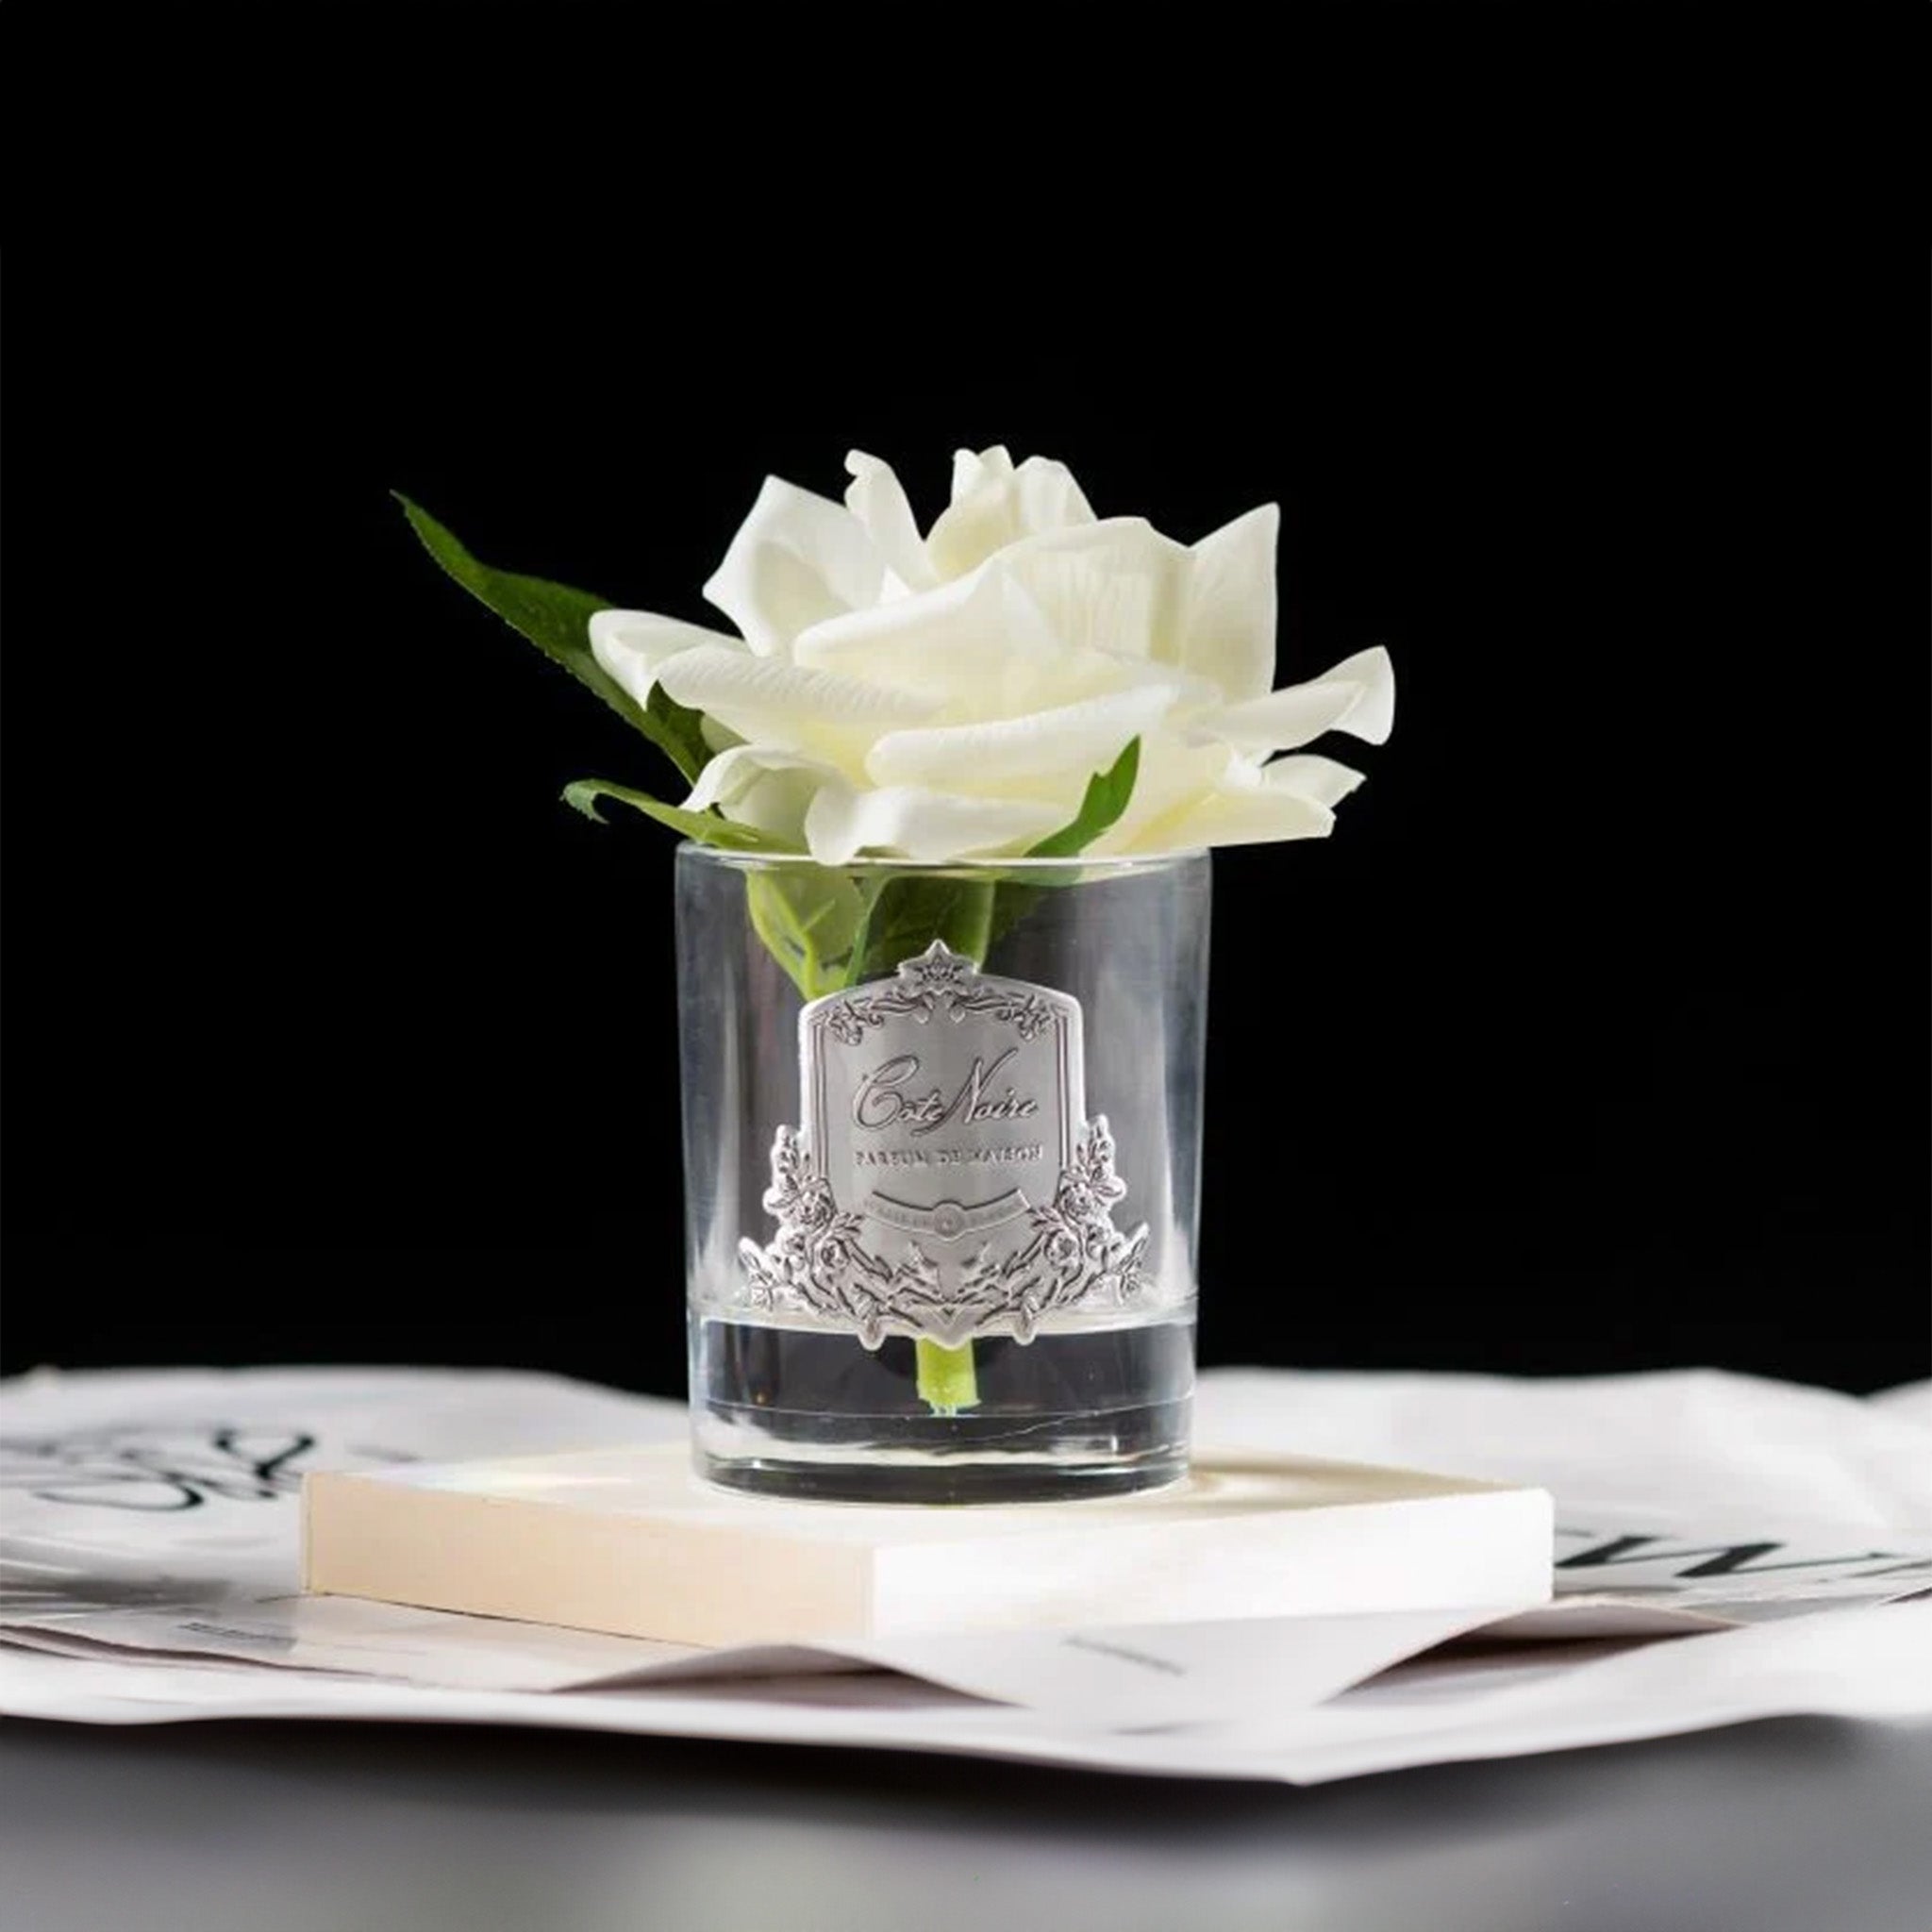 a white rose in a glass vase aby cote noire on a table